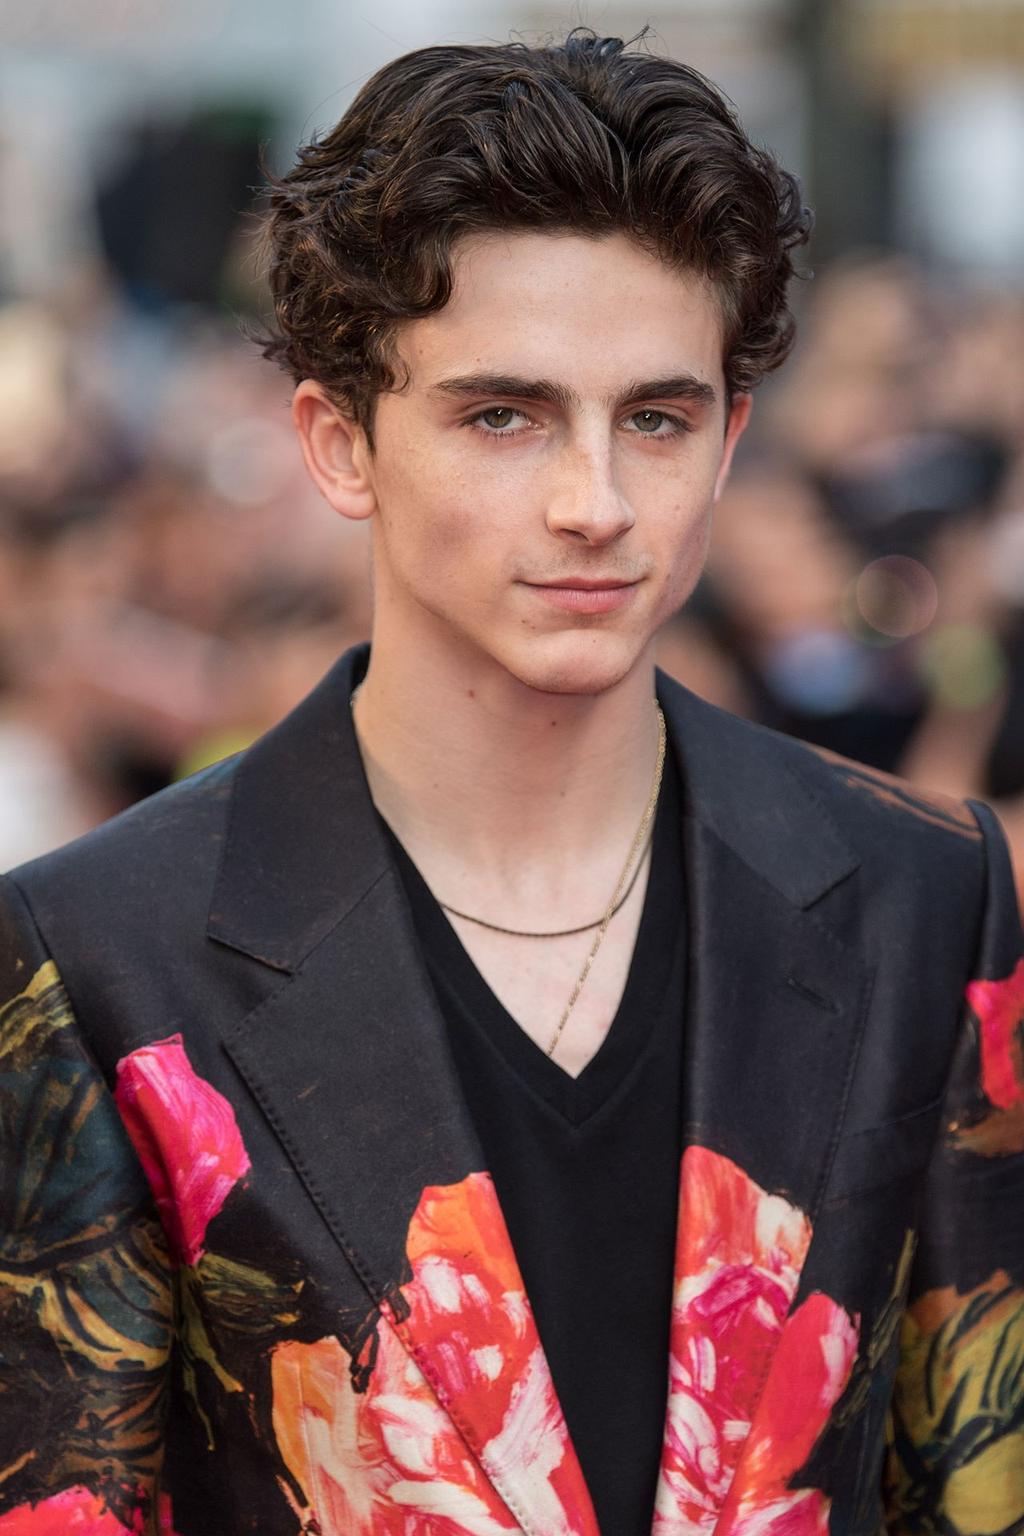 What You Don't Know About Timothée Chalamet